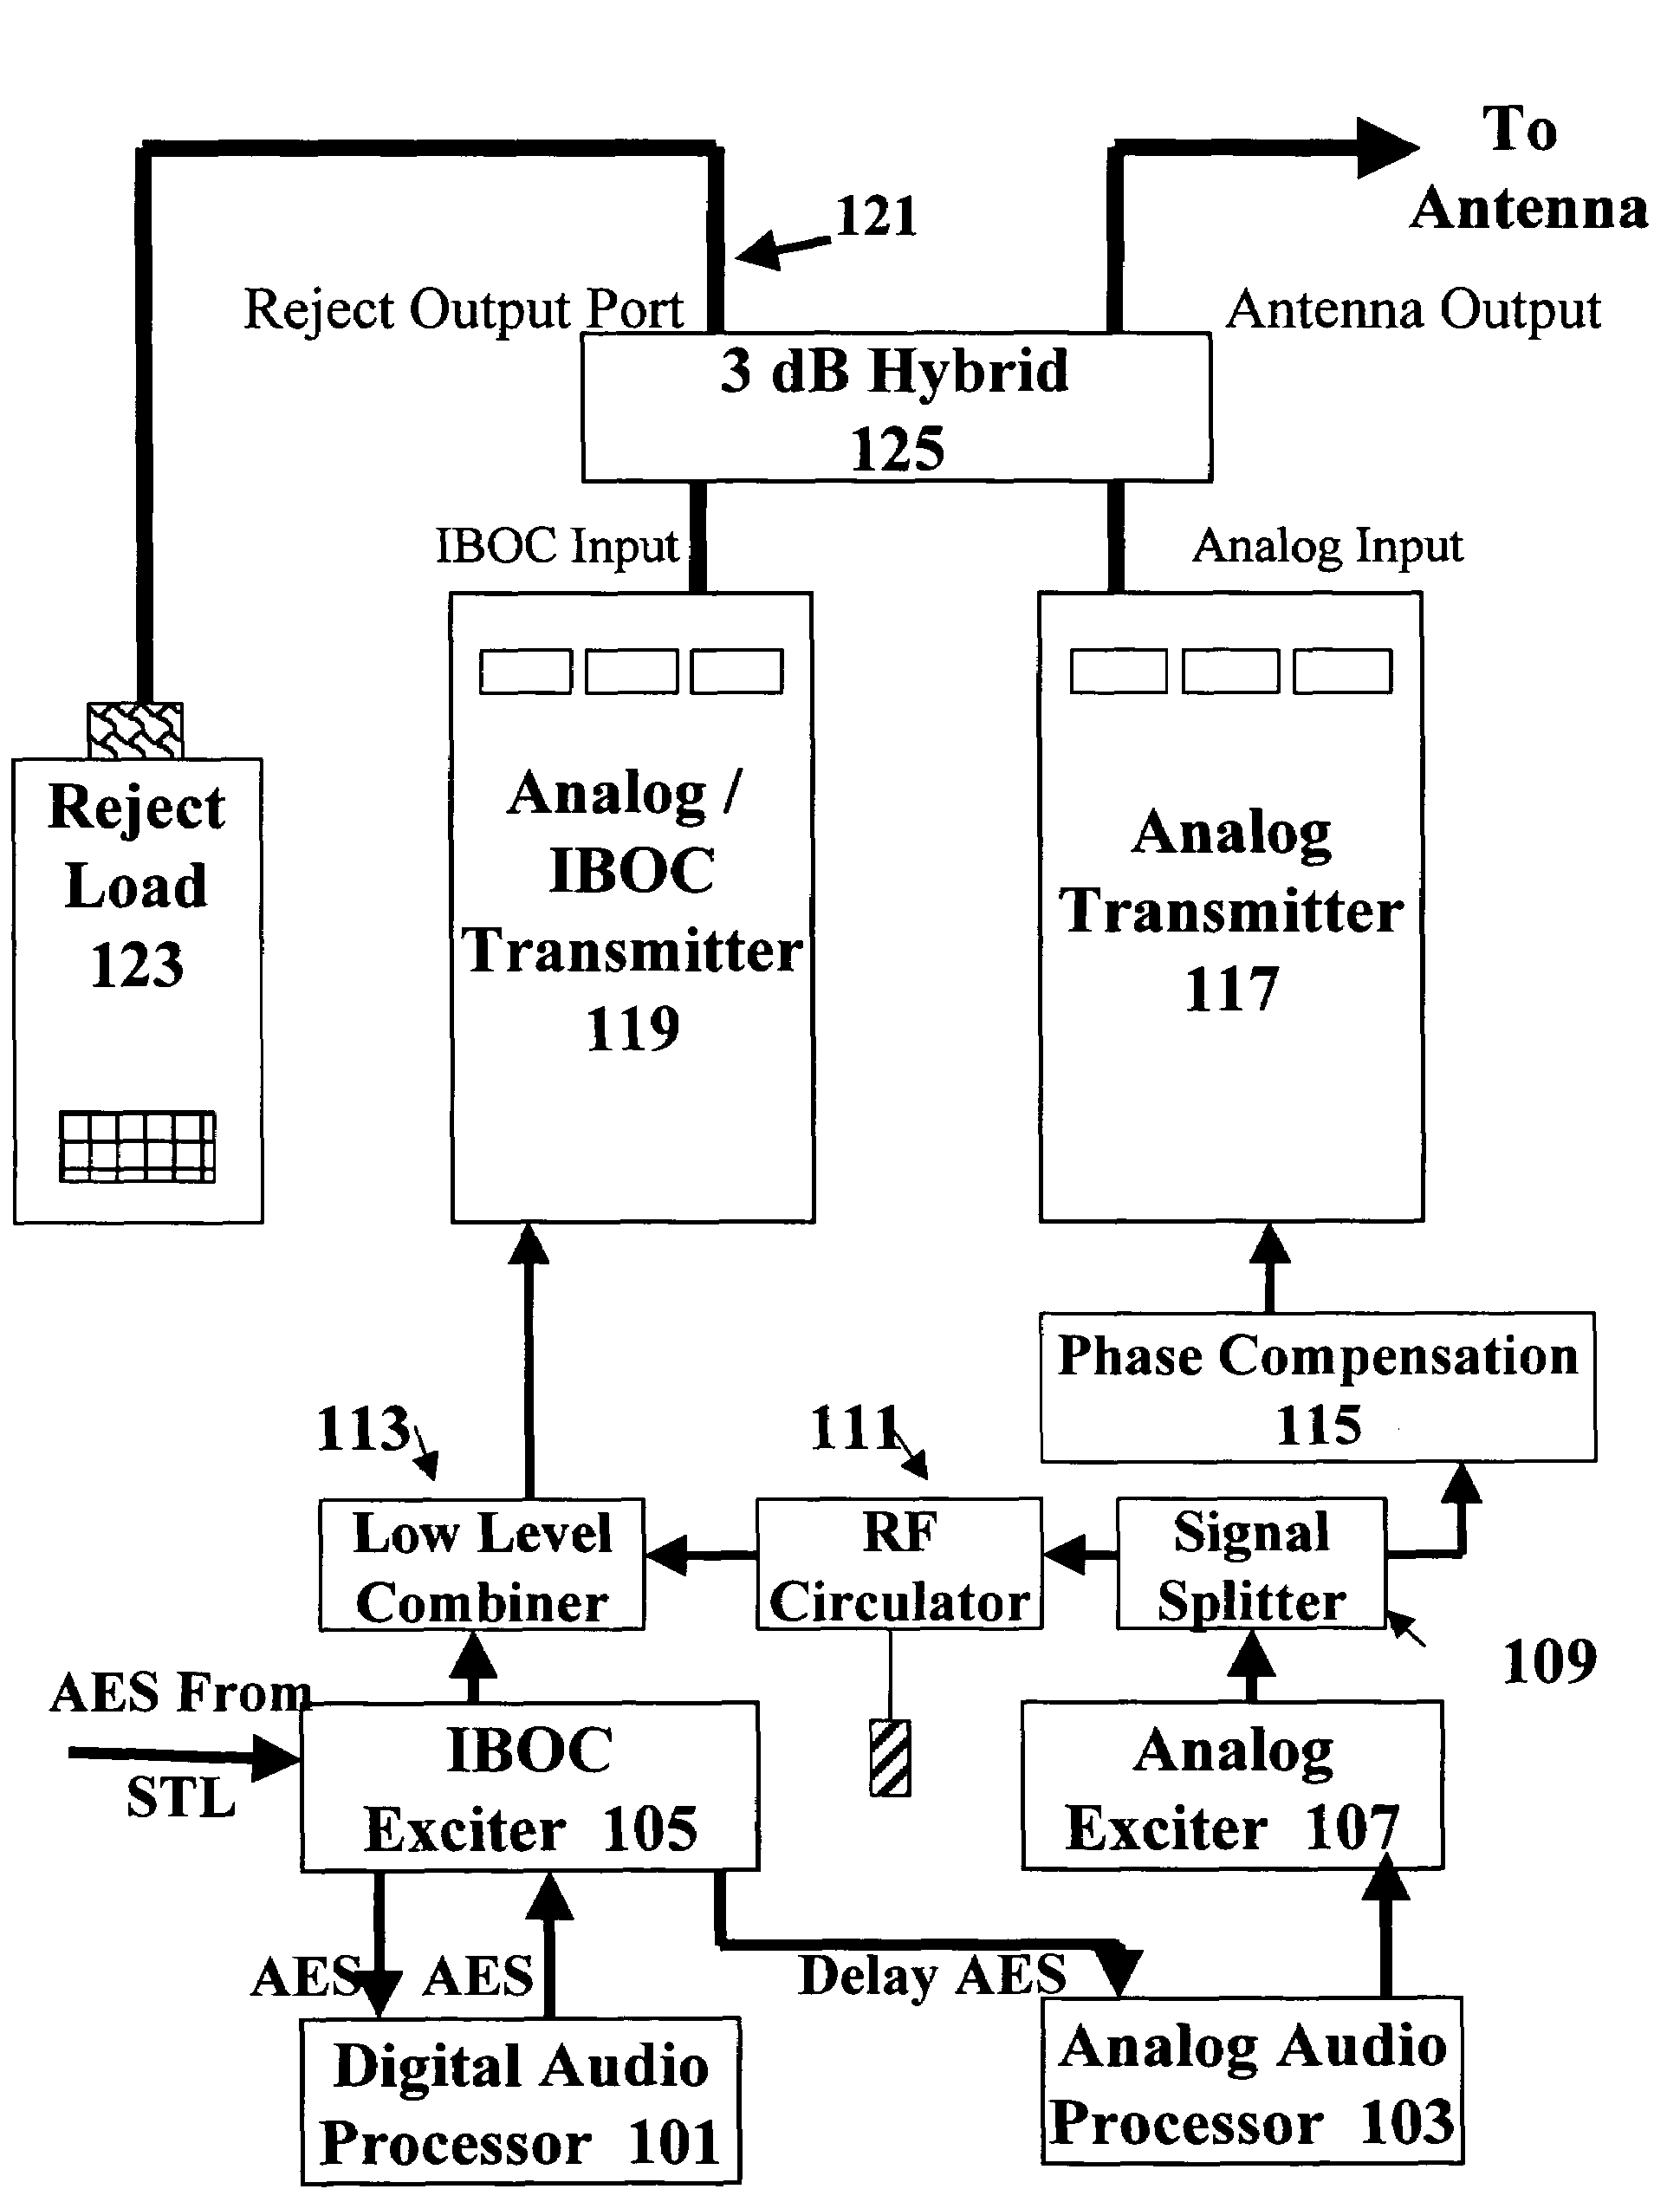 HD digital radio combining methods and systems